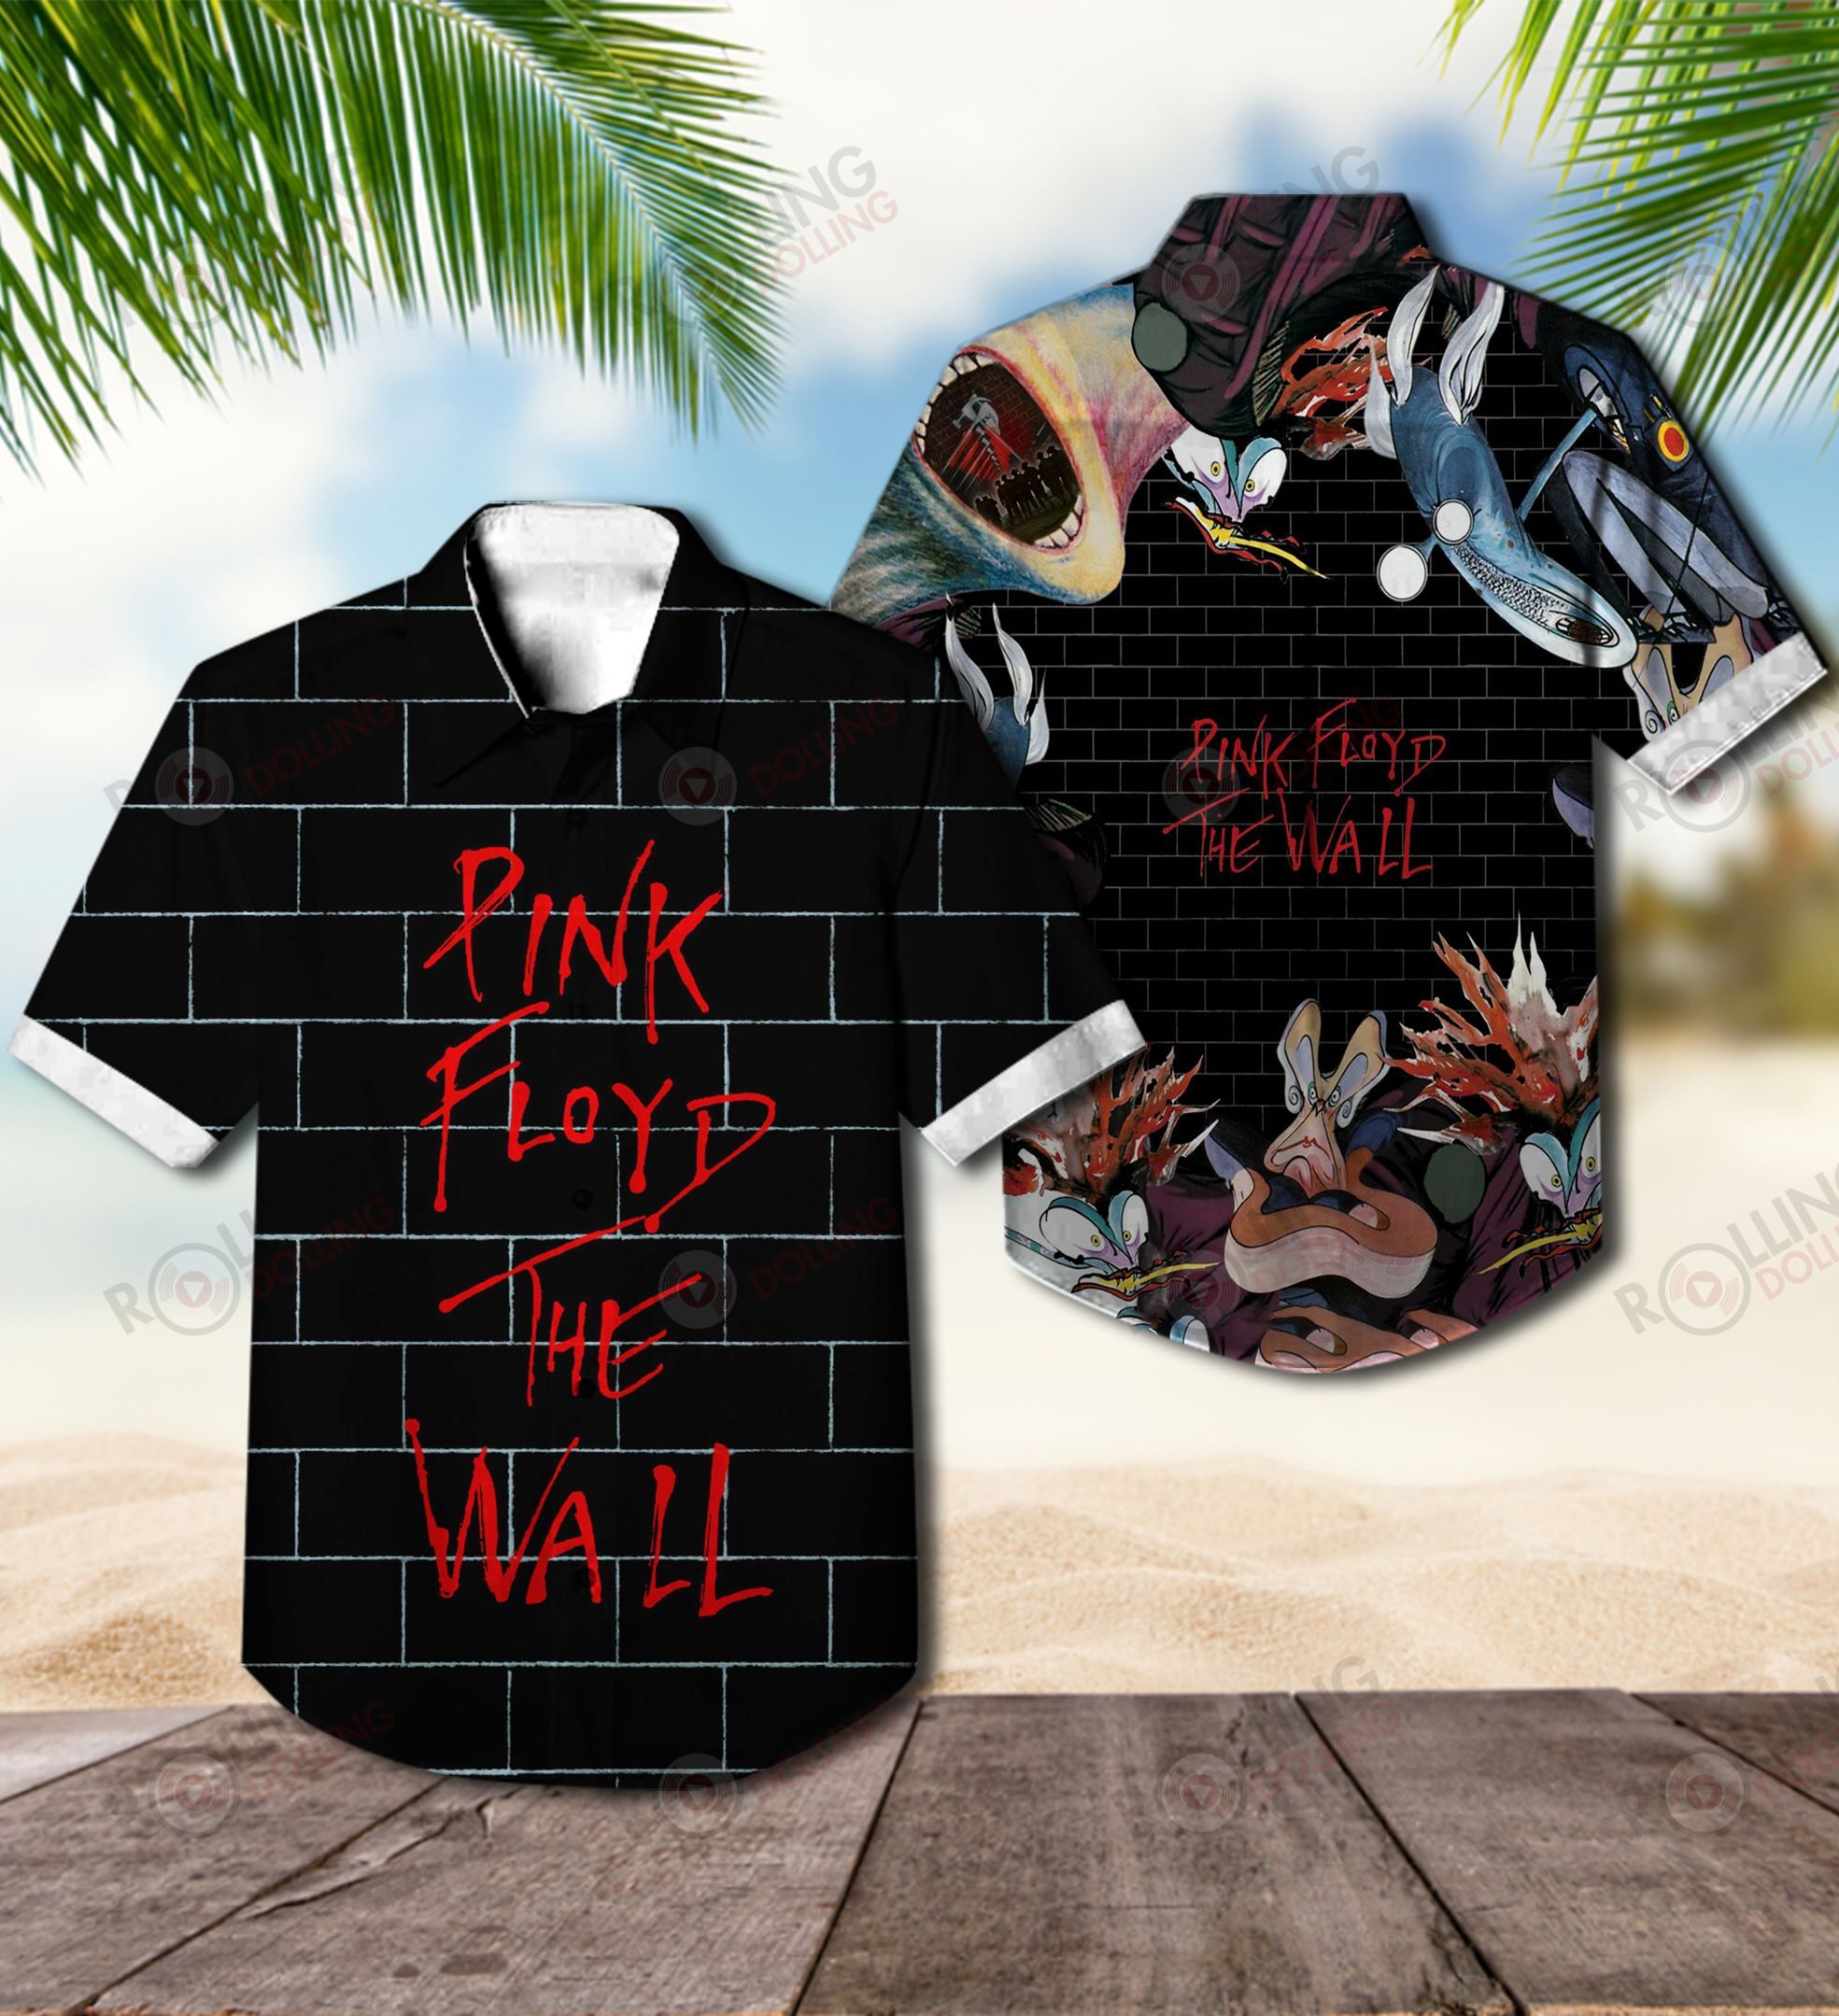 Check out these top 100+ Hawaiian shirt so cool for rock fans 275